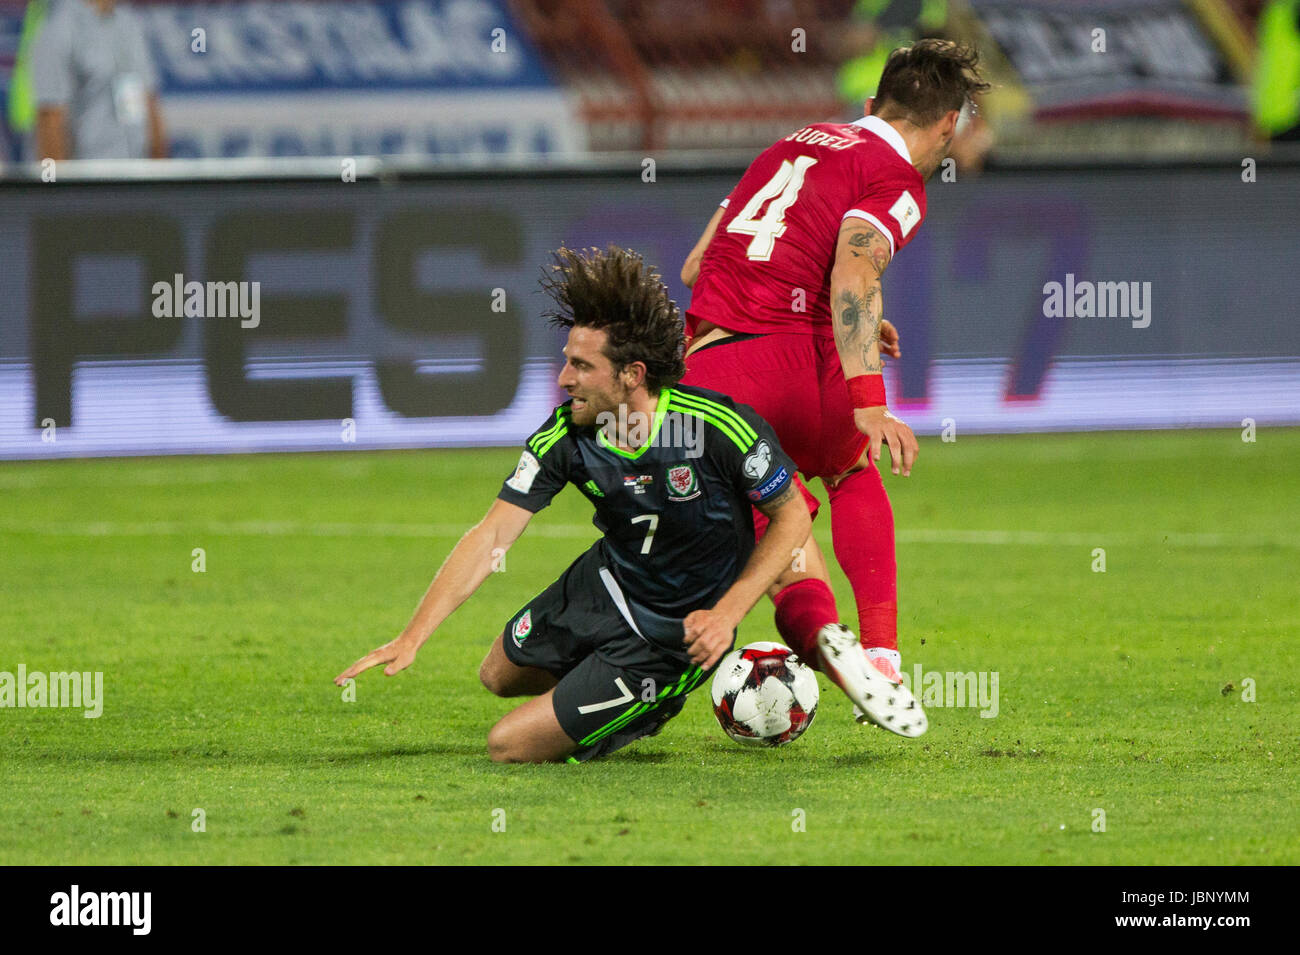 BELGRADE, SERBIA - JUNE 11, 2017: Joe Allen (L) of Wales fights for the ball with Nemanja Gudelj (R) of Serbia during the 2018 FIFA World Cup Qualifie Stock Photo